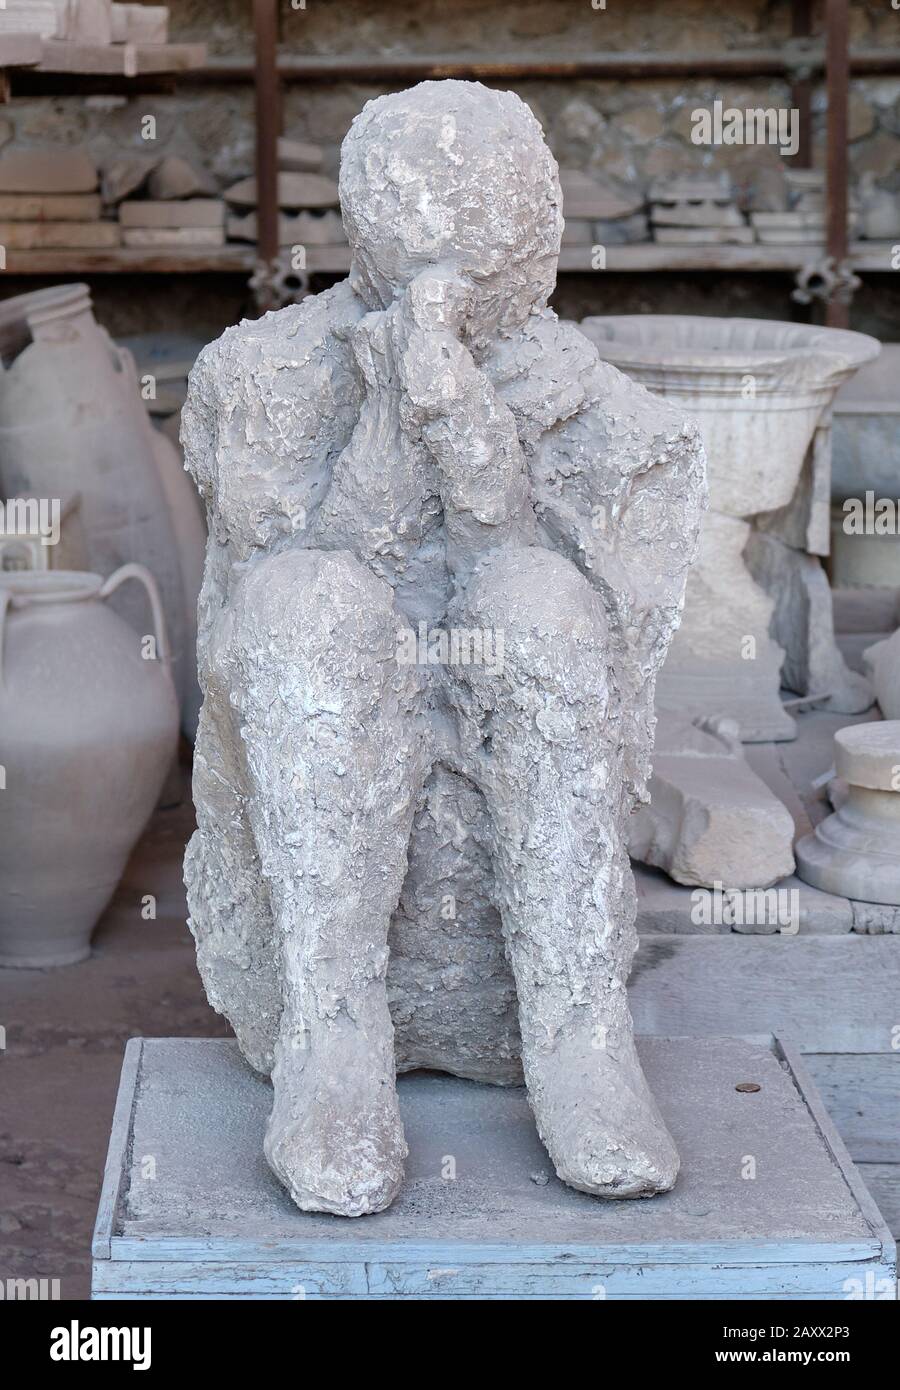 Buried in ash and suffocated by poisonous gases while covering his mouth and nose, this  preserved cast is on display at Pompeii, Italy Stock Photo